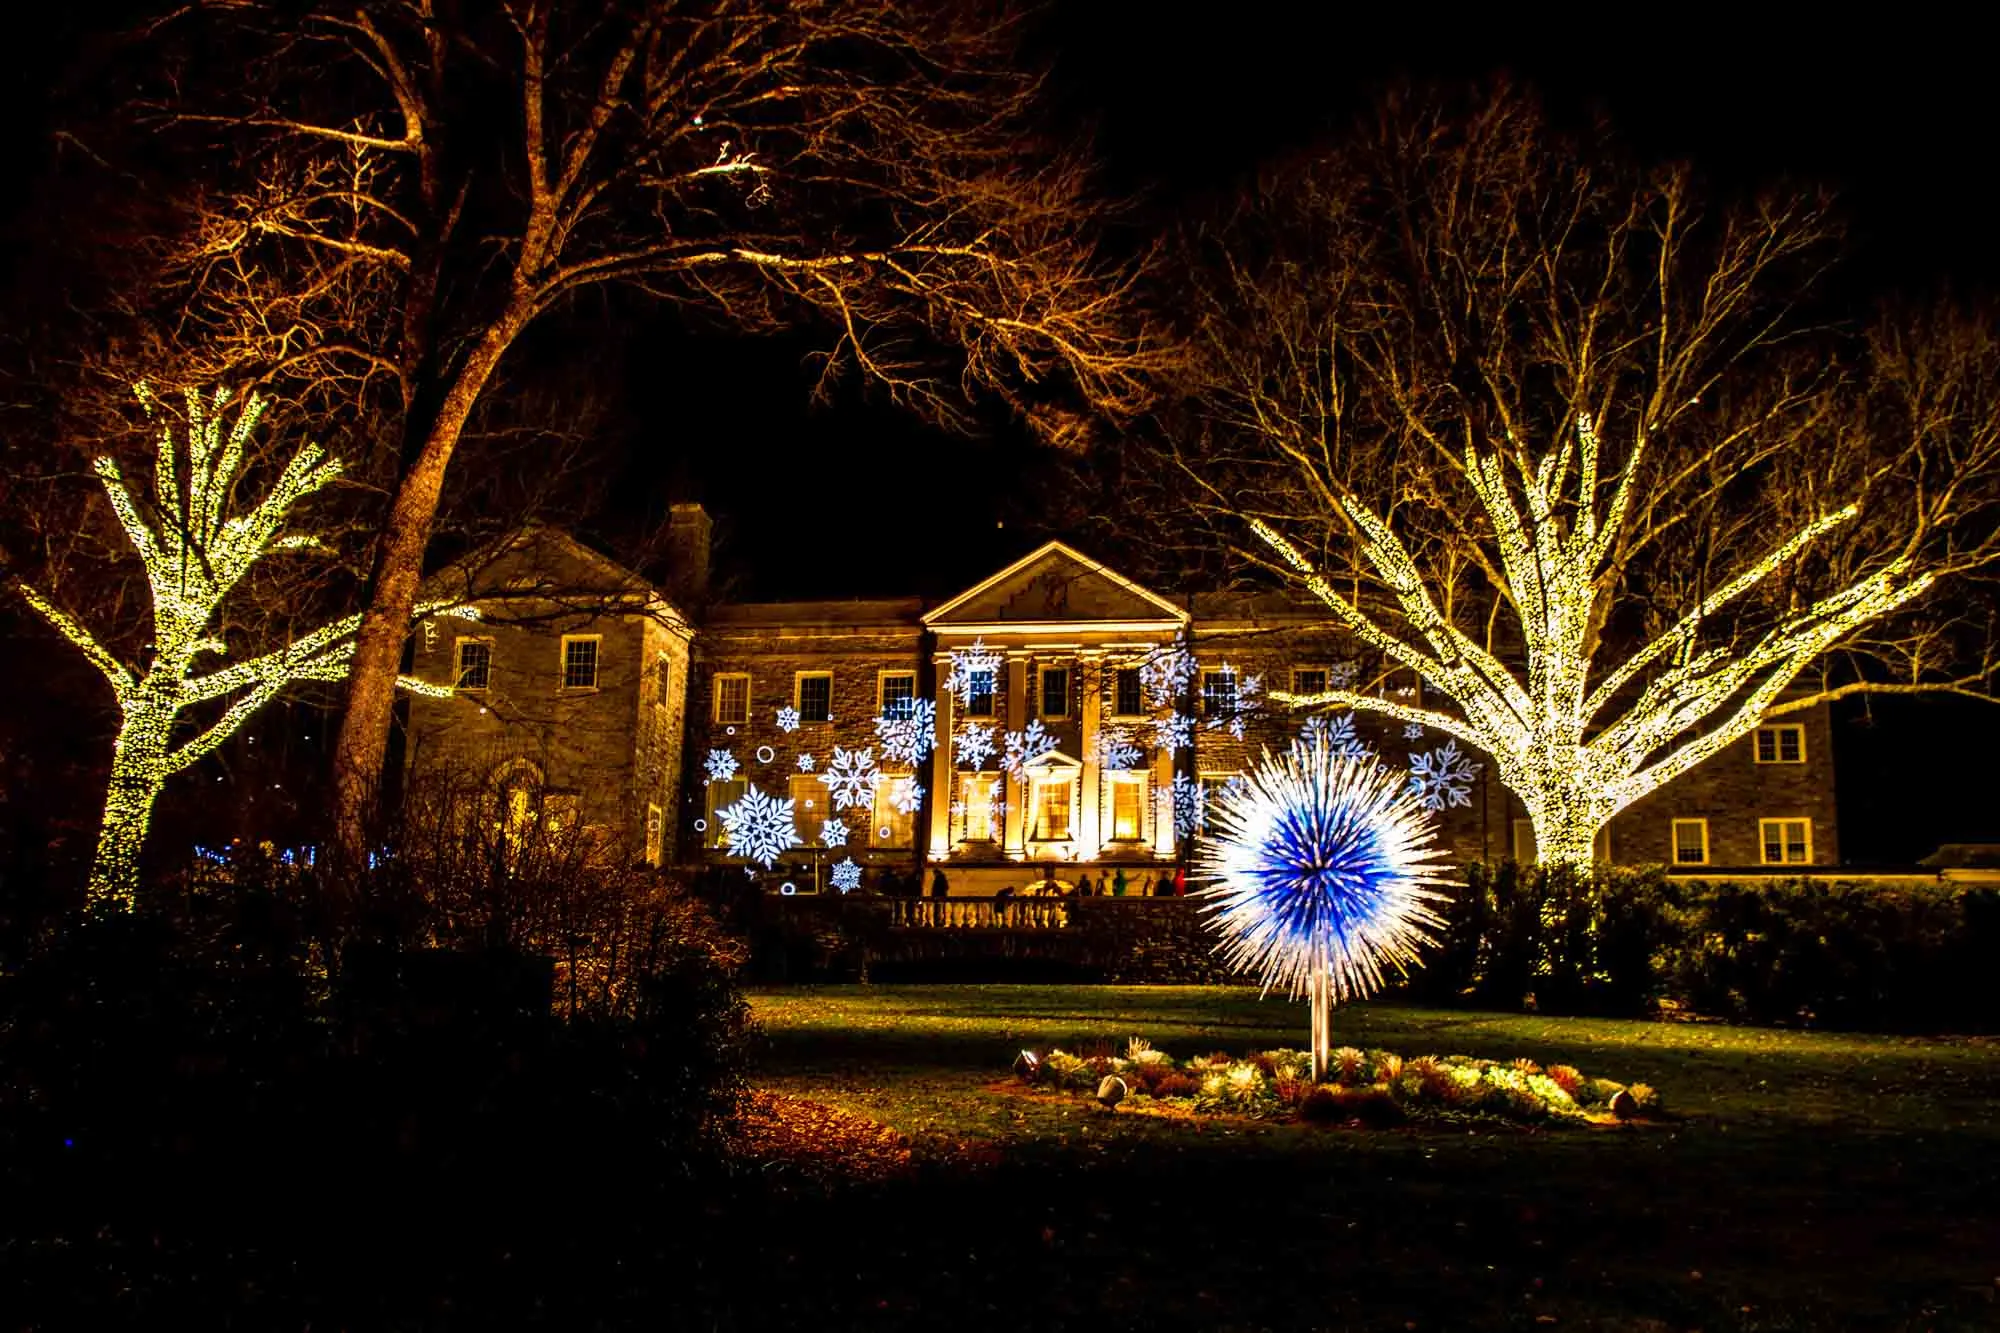 Snowflake lights projected on a mansion facade beside lit up trees and an illuminated blue and white sculpture